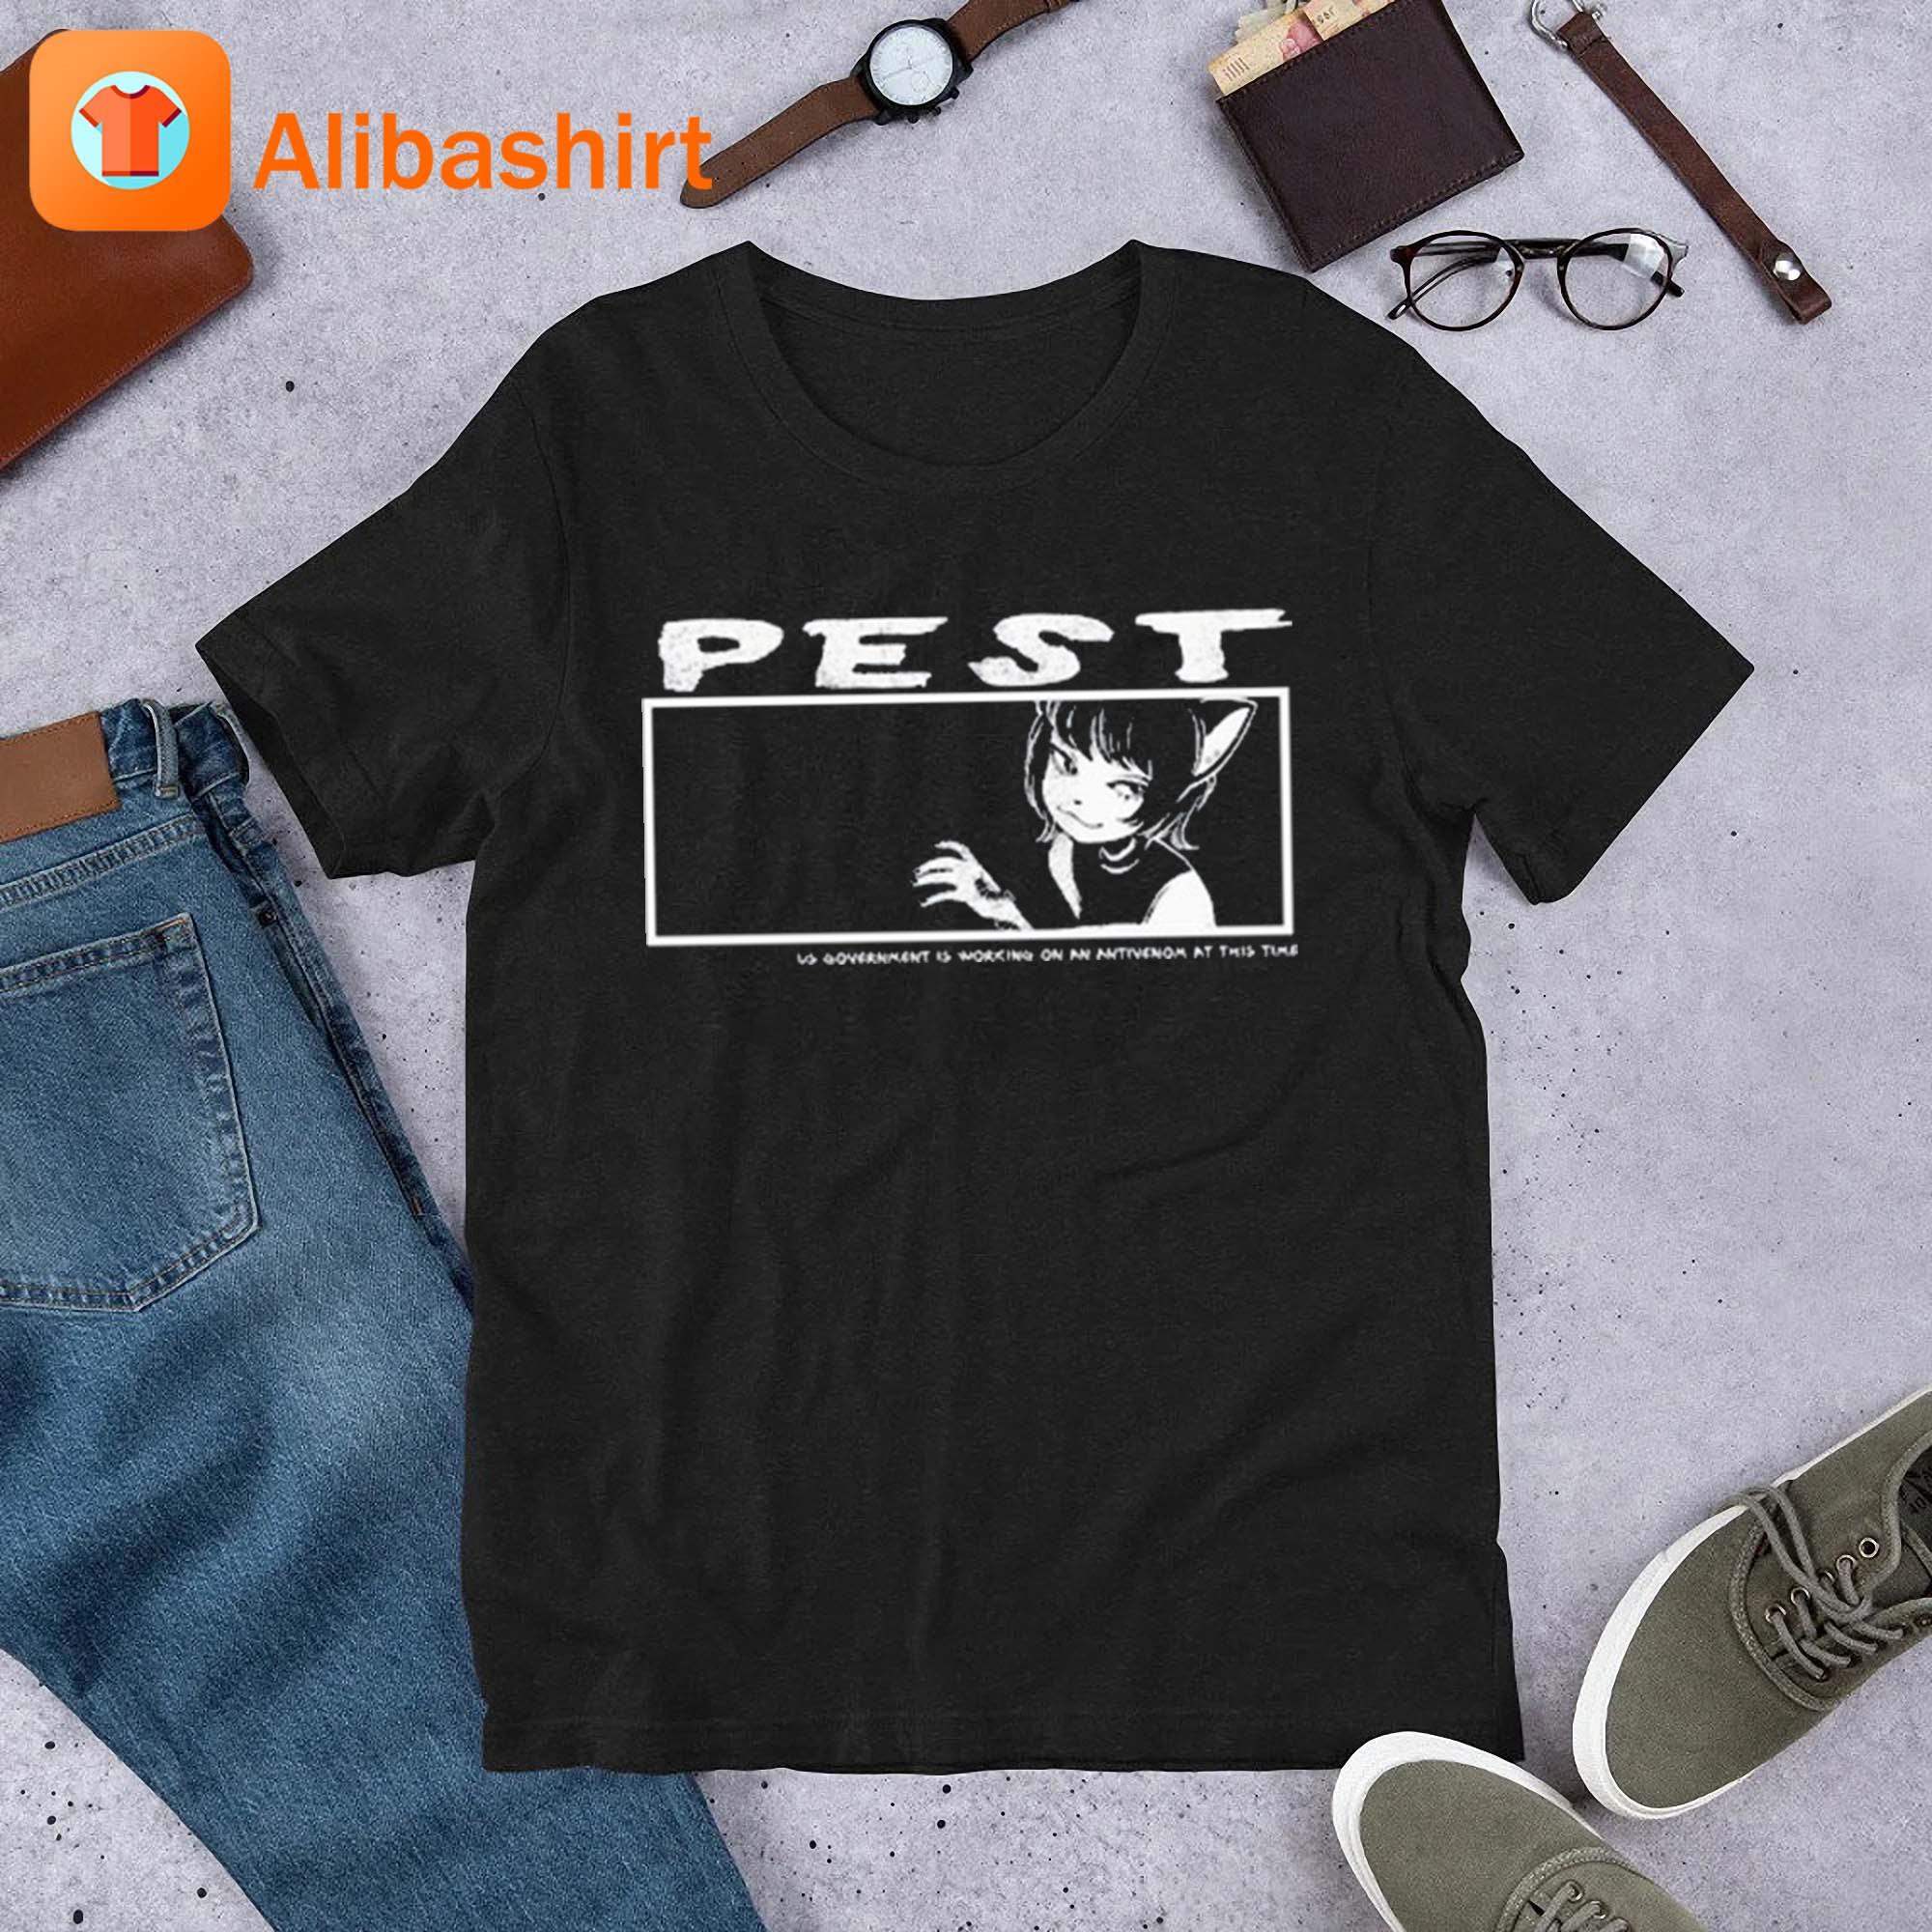 Pest Us Government Is Working On An Antivenom At This Time Shirt